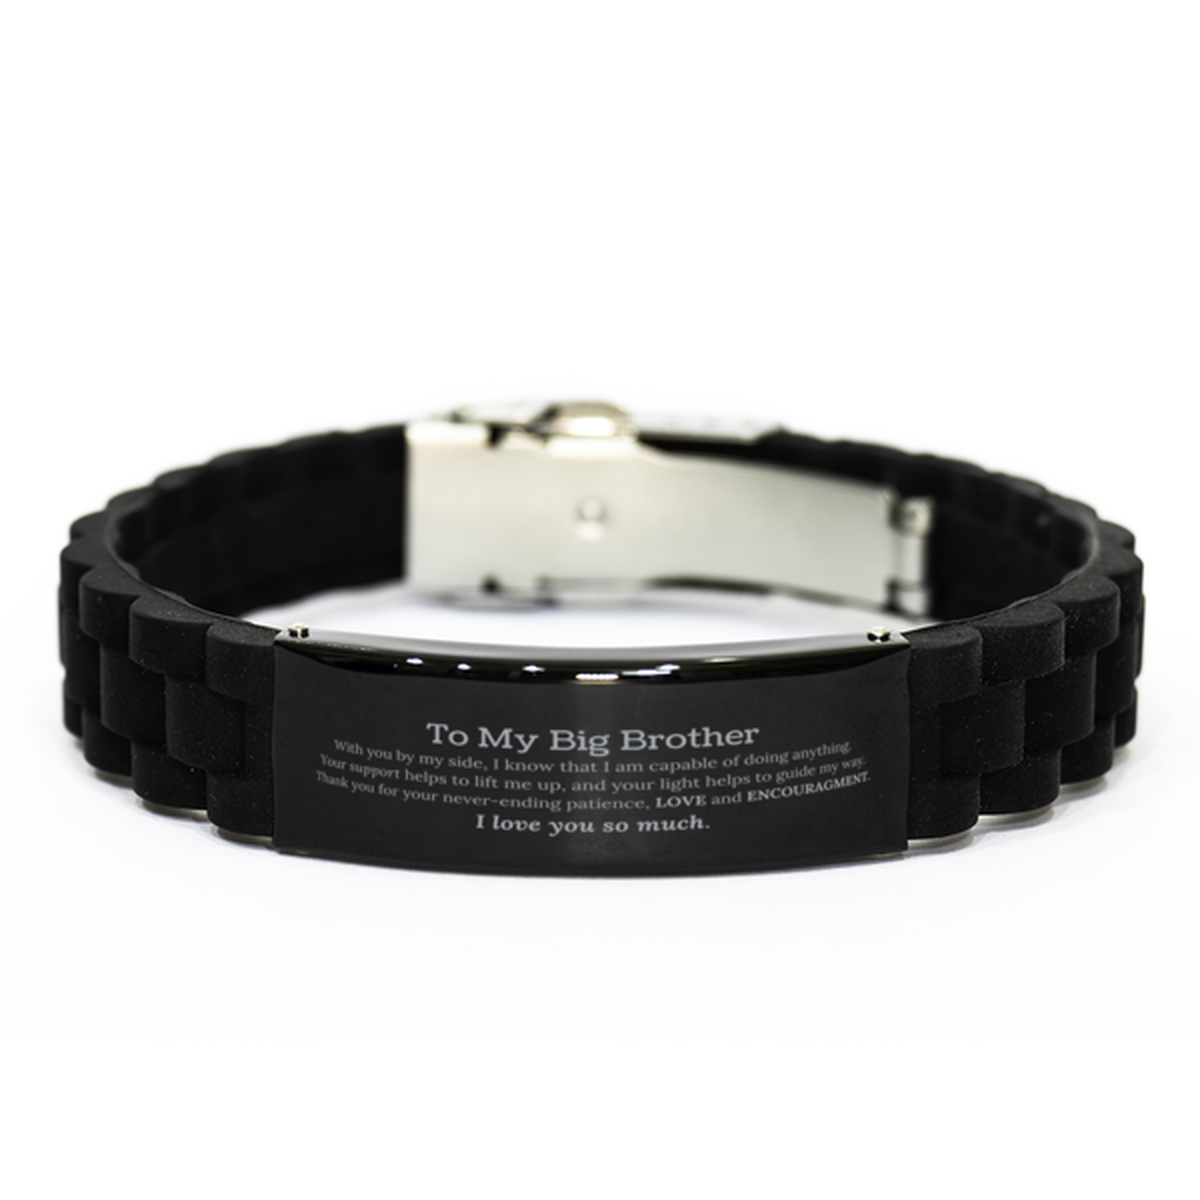 Appreciation Big Brother Black Glidelock Clasp Bracelet Gifts, To My Big Brother Birthday Christmas Wedding Keepsake Gifts for Big Brother With you by my side, I know that I am capable of doing anything. I love you so much